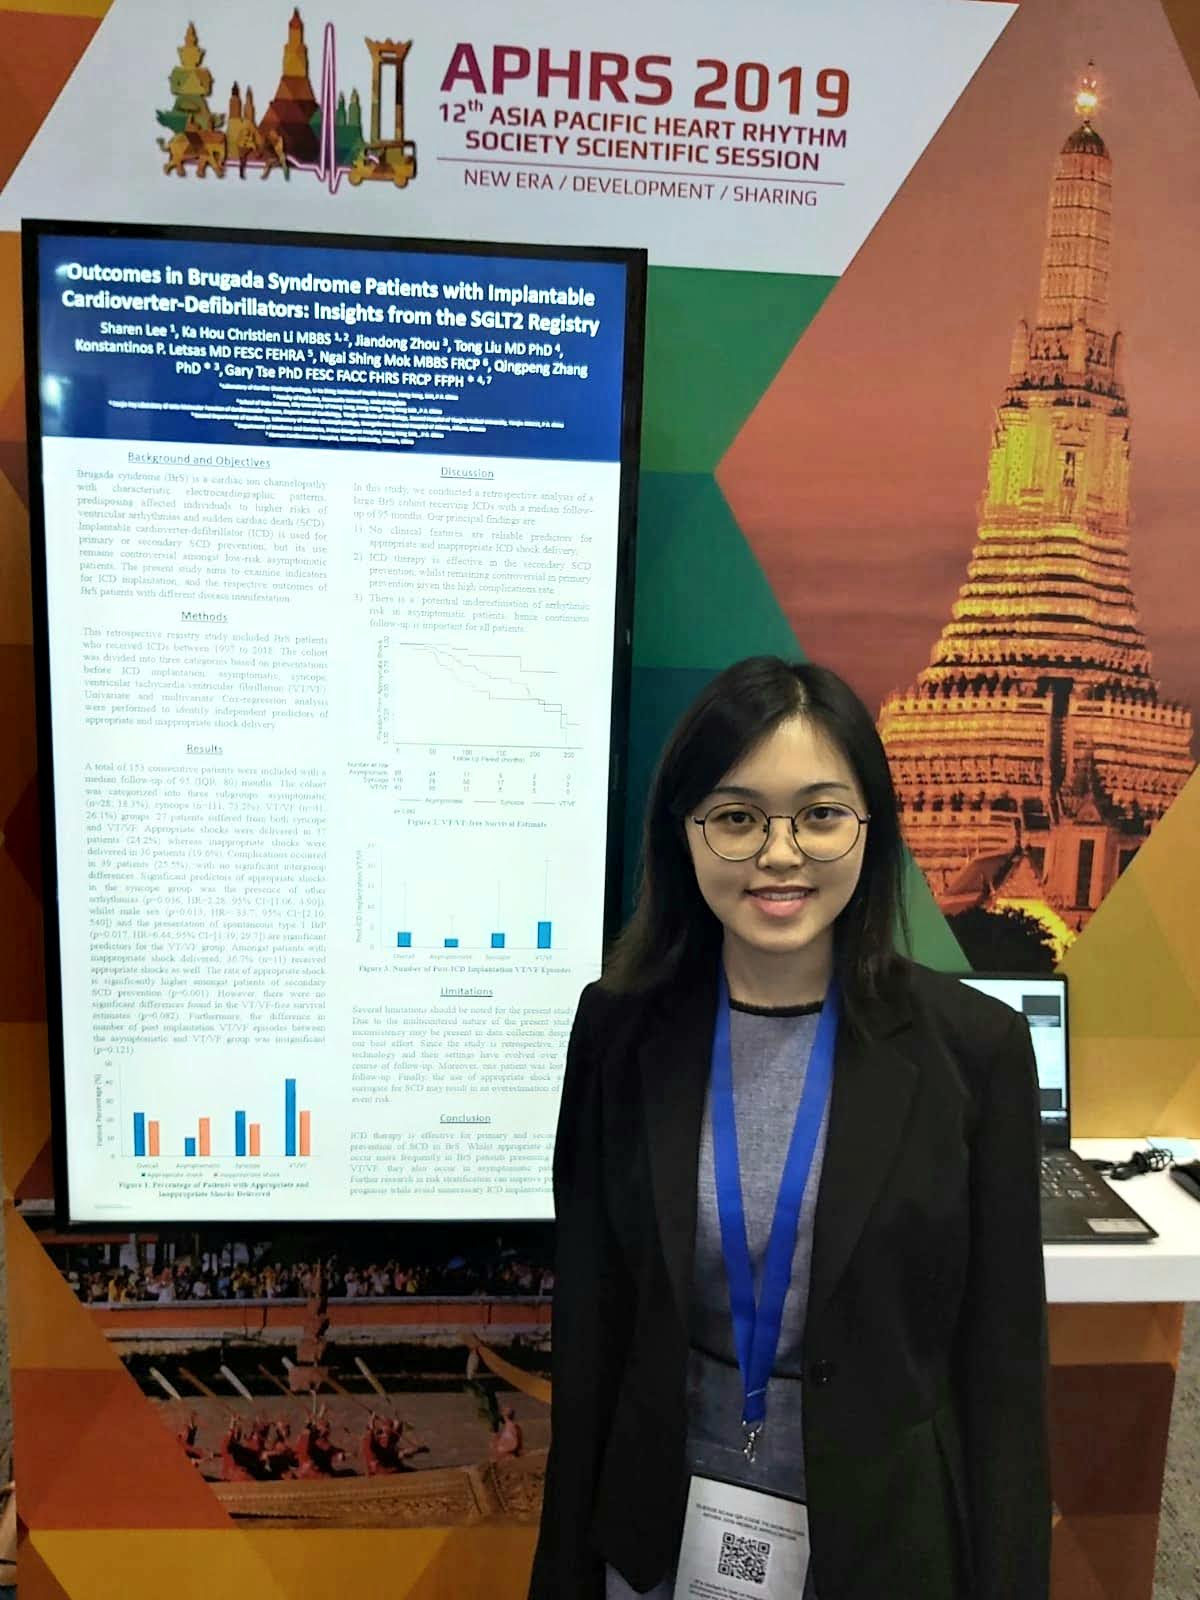 Sharen Lee presented her findings of Brugada Syndrome at the 12th Asia Pacific Heart Rhythm Society Scientific Session in Thailand.